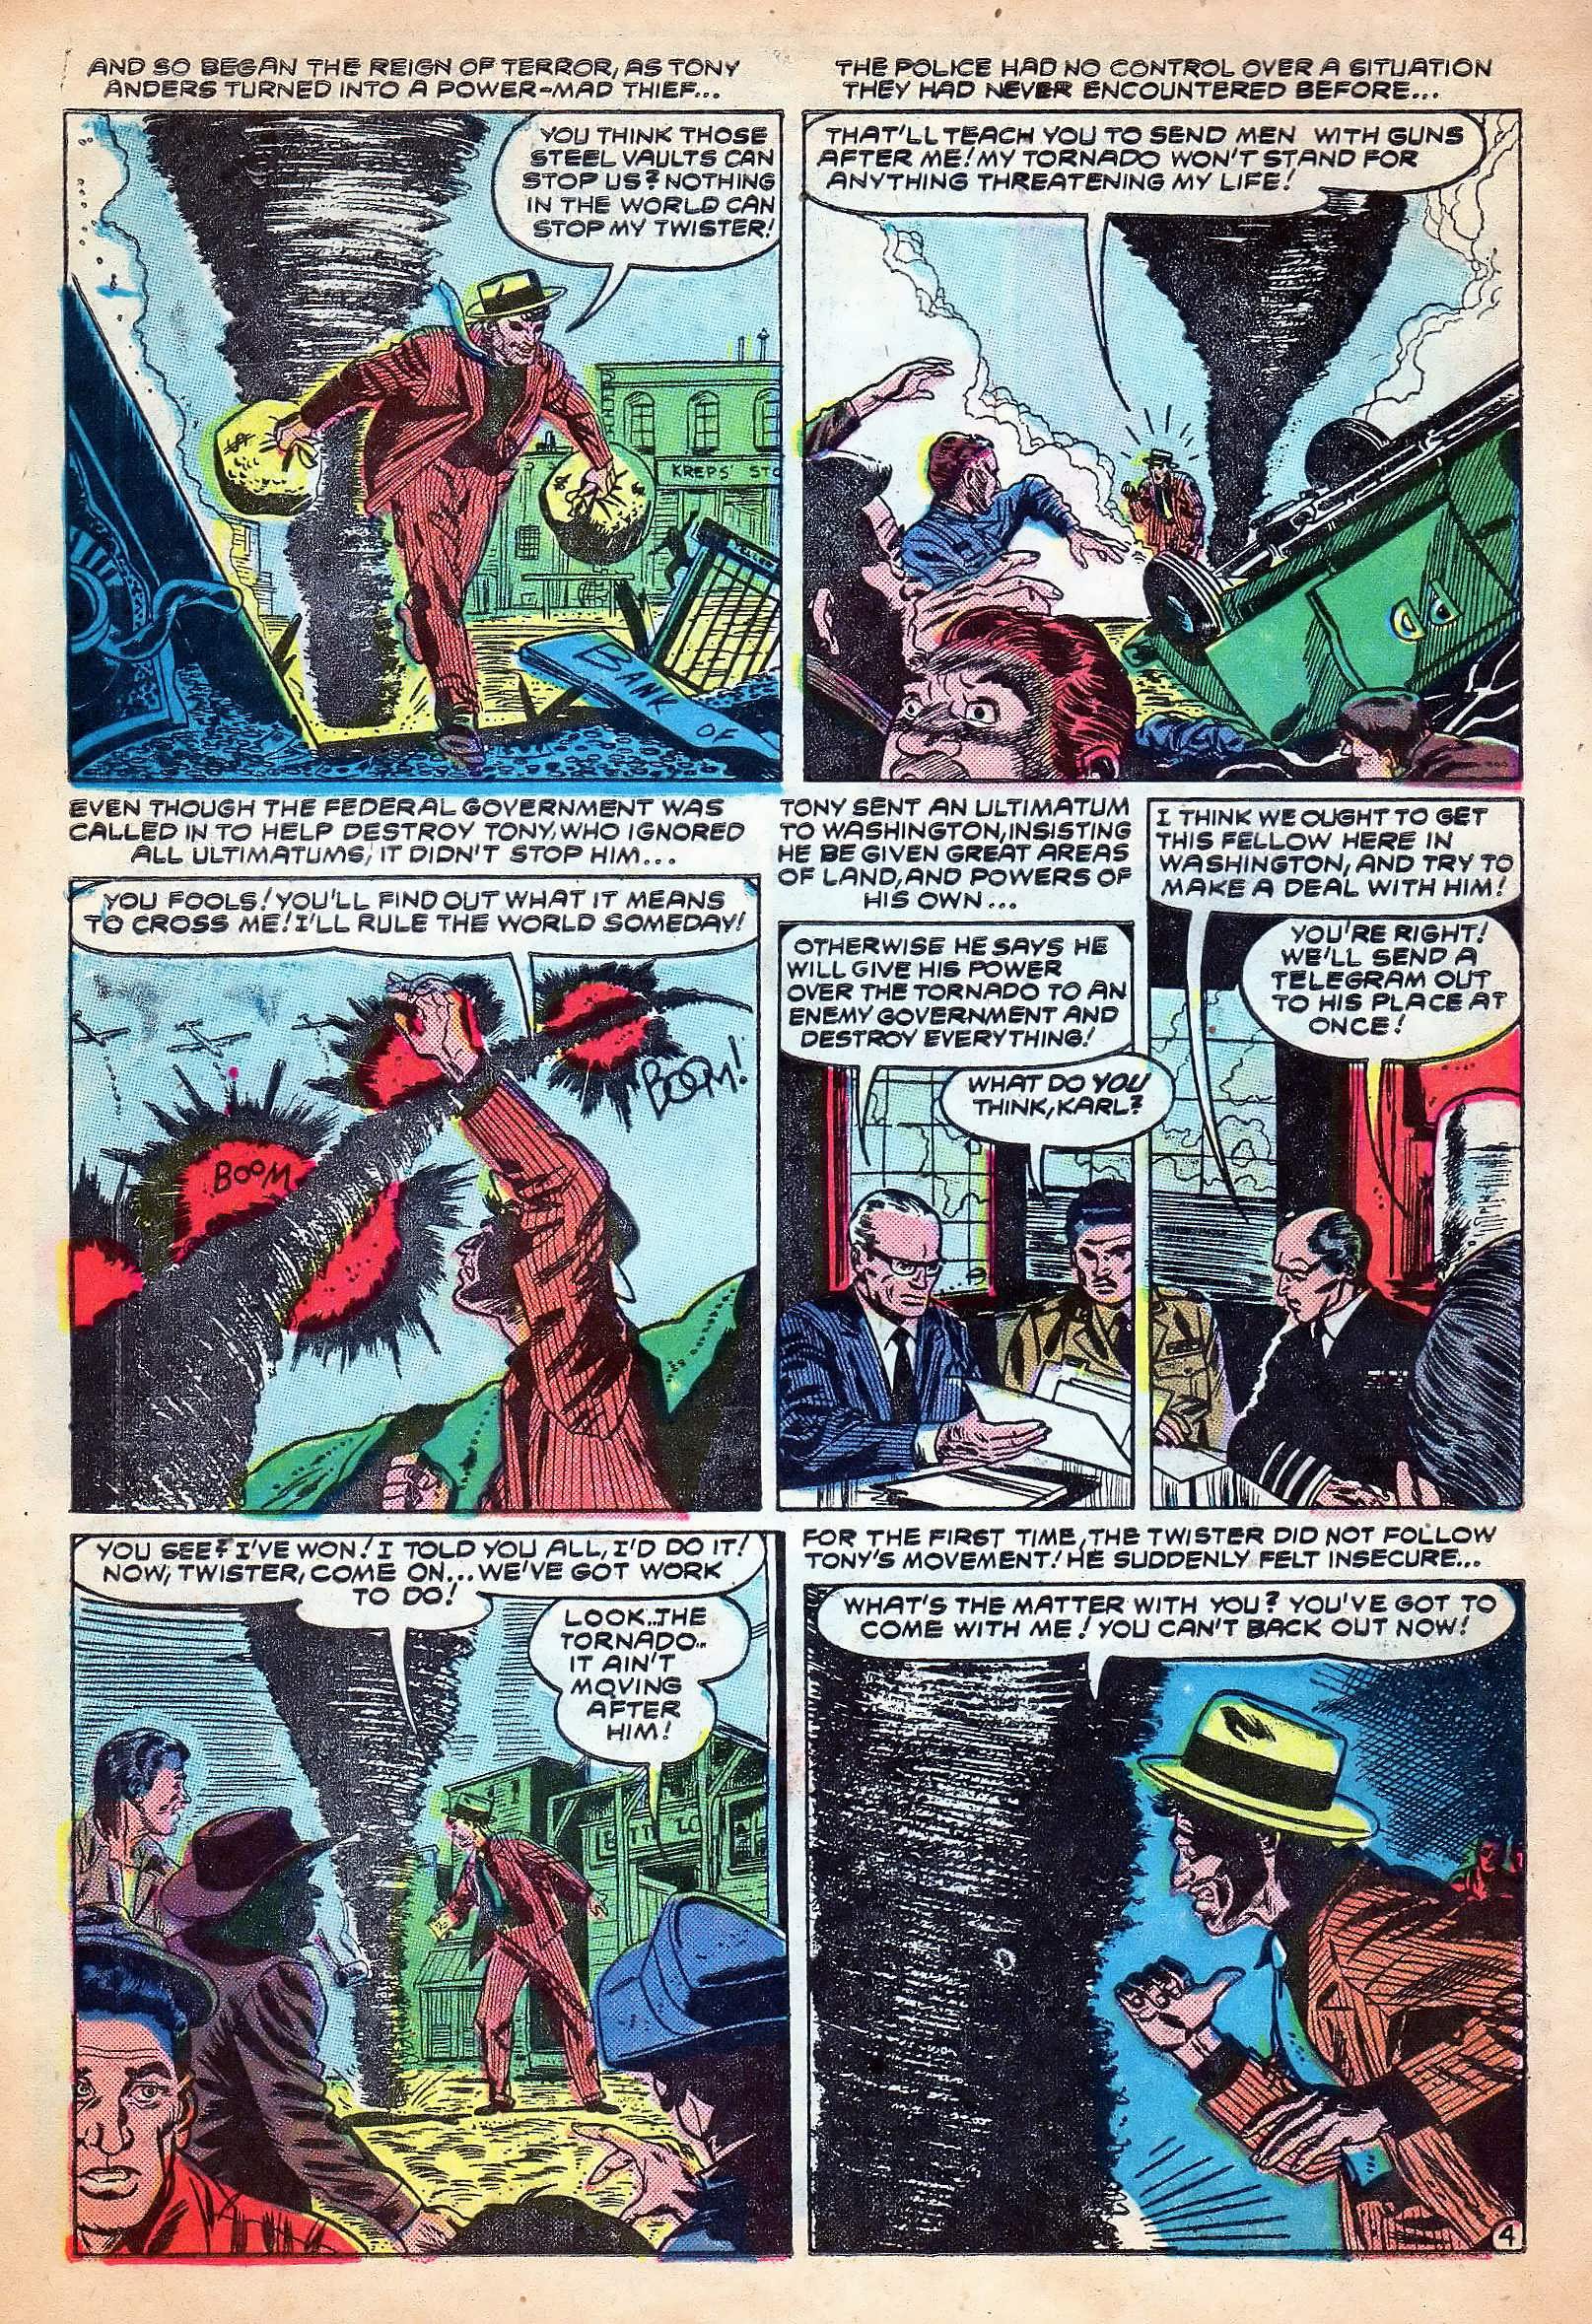 Marvel Tales (1949) 130 Page 5